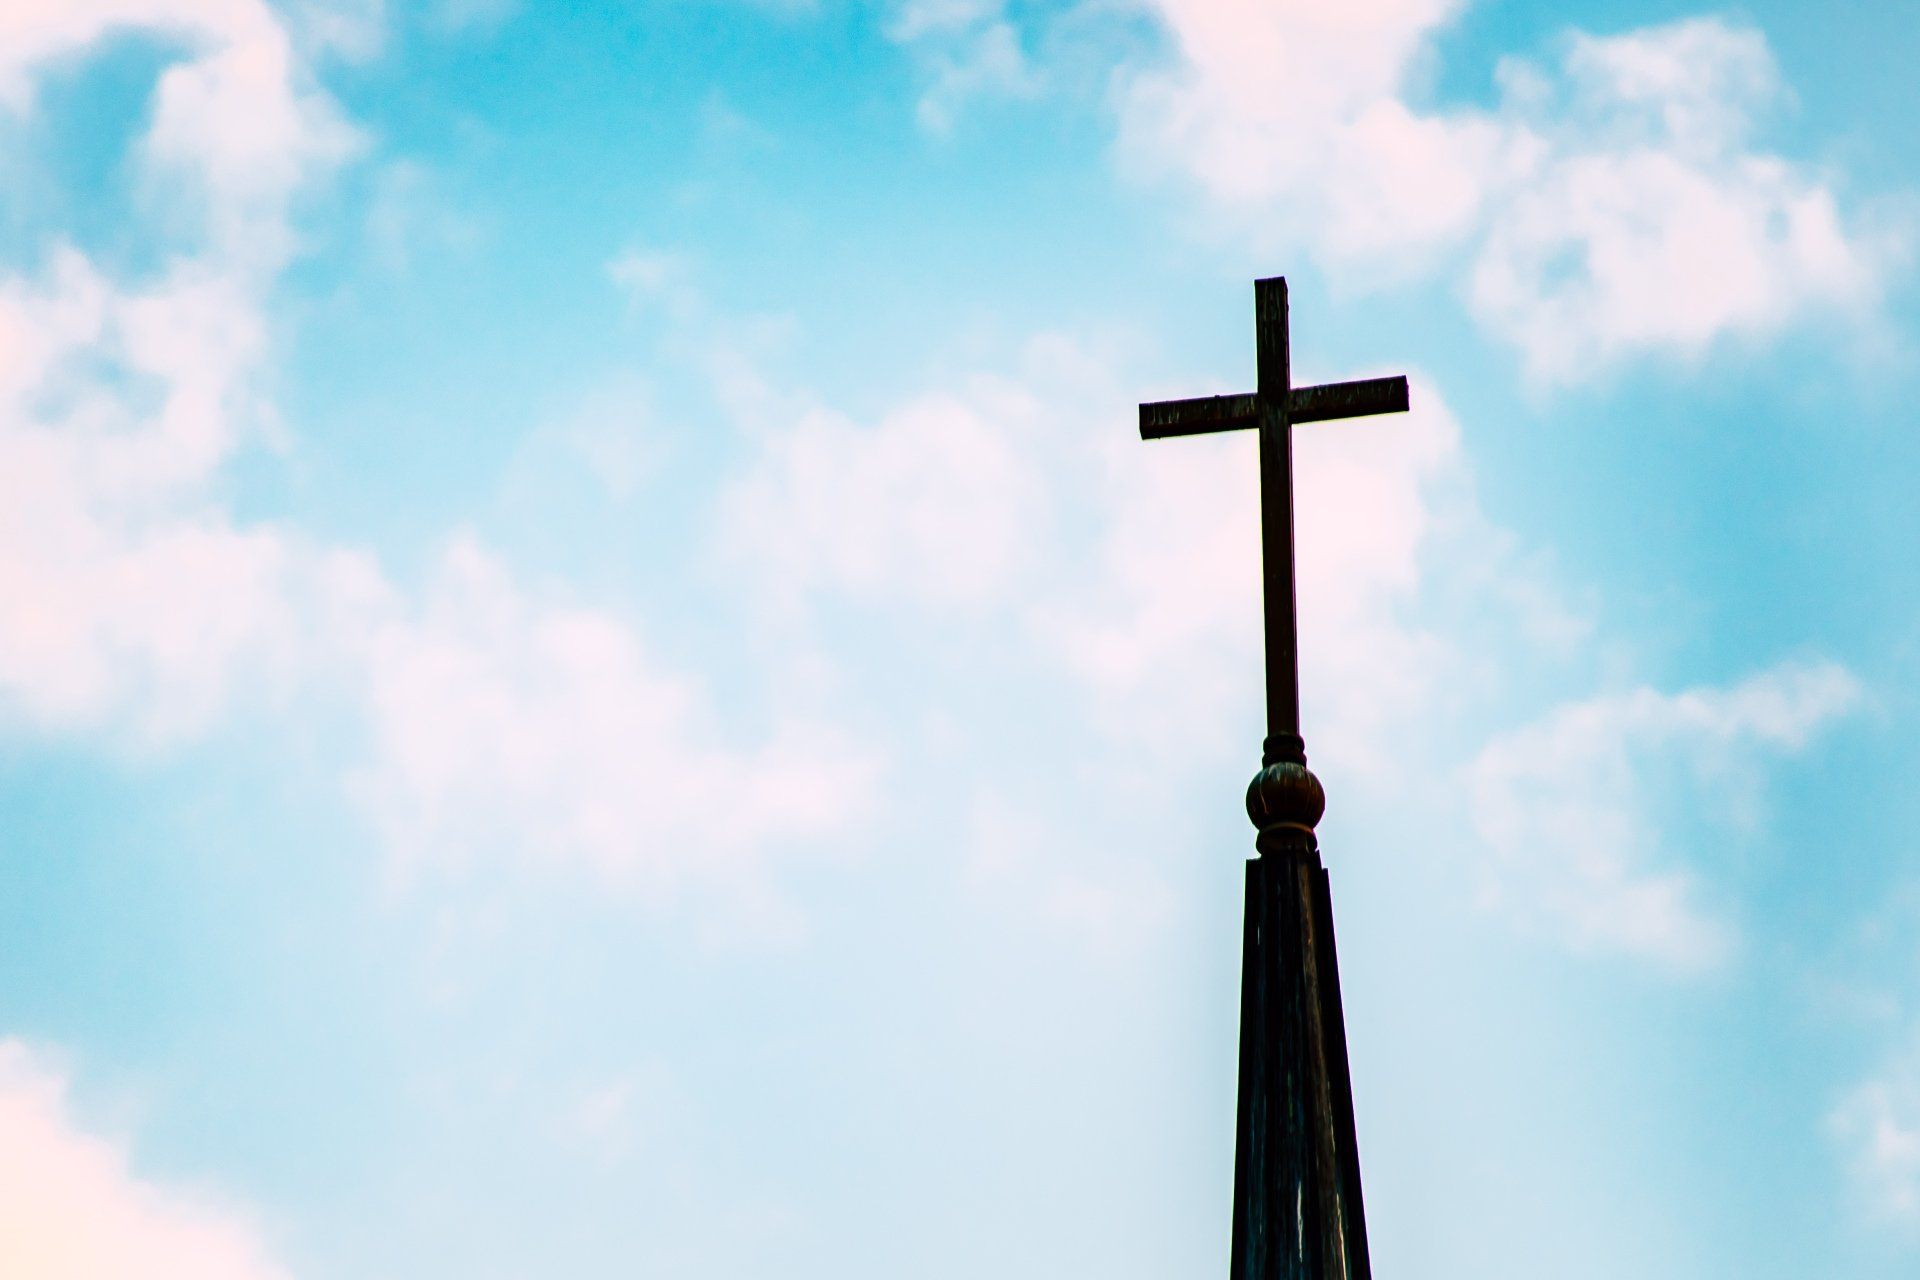 a church steeple with a cross on top of it against a cloudy blue sky .